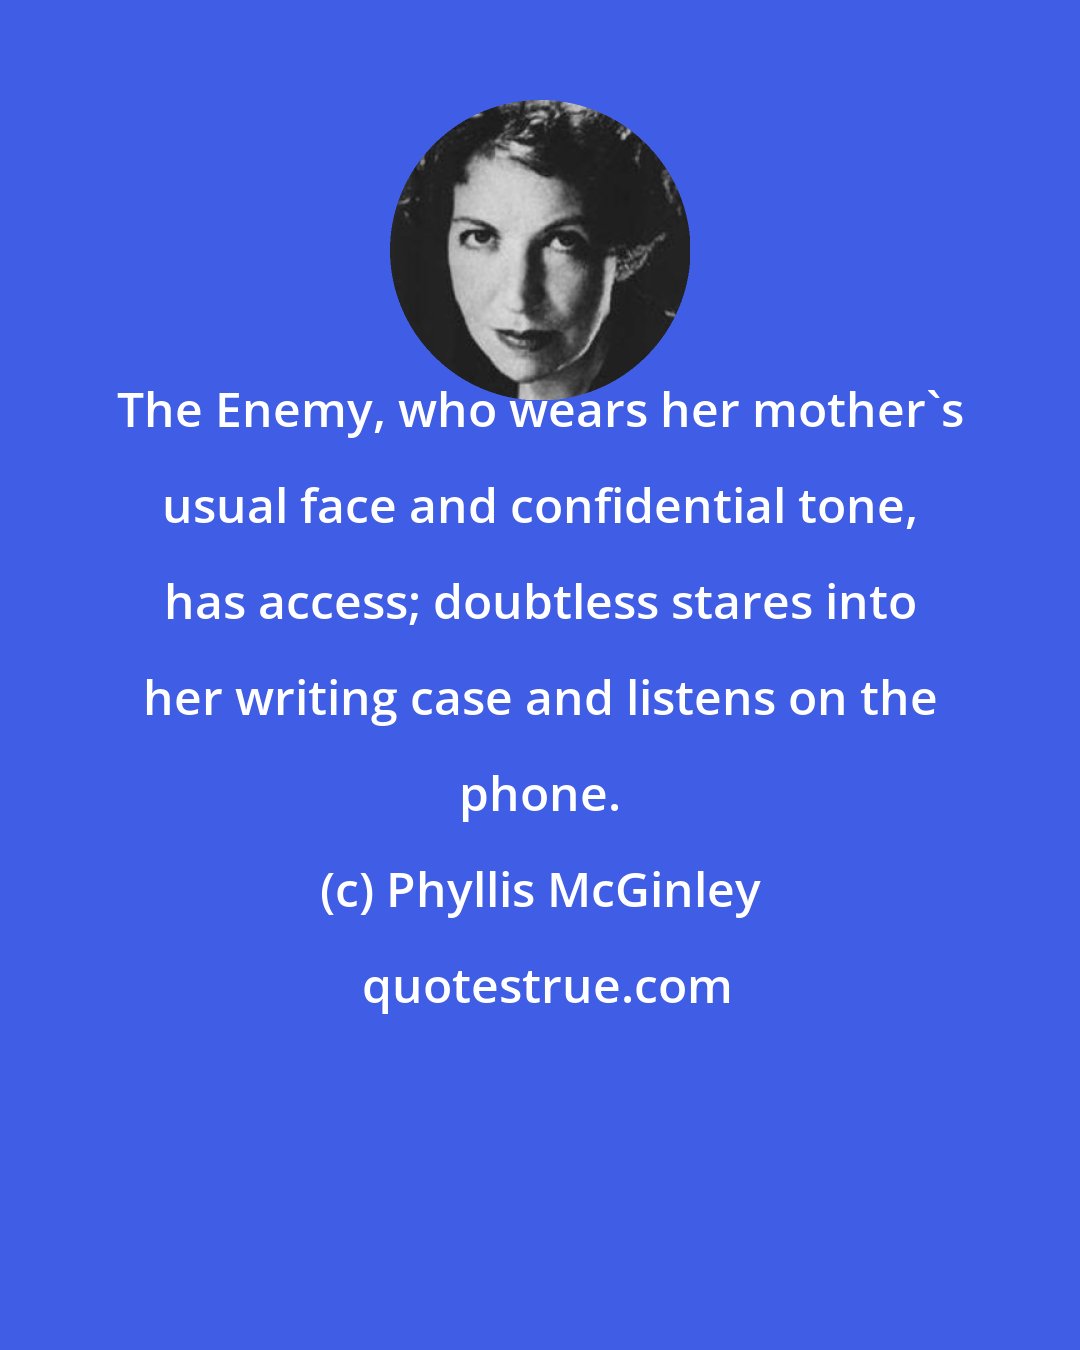 Phyllis McGinley: The Enemy, who wears her mother's usual face and confidential tone, has access; doubtless stares into her writing case and listens on the phone.